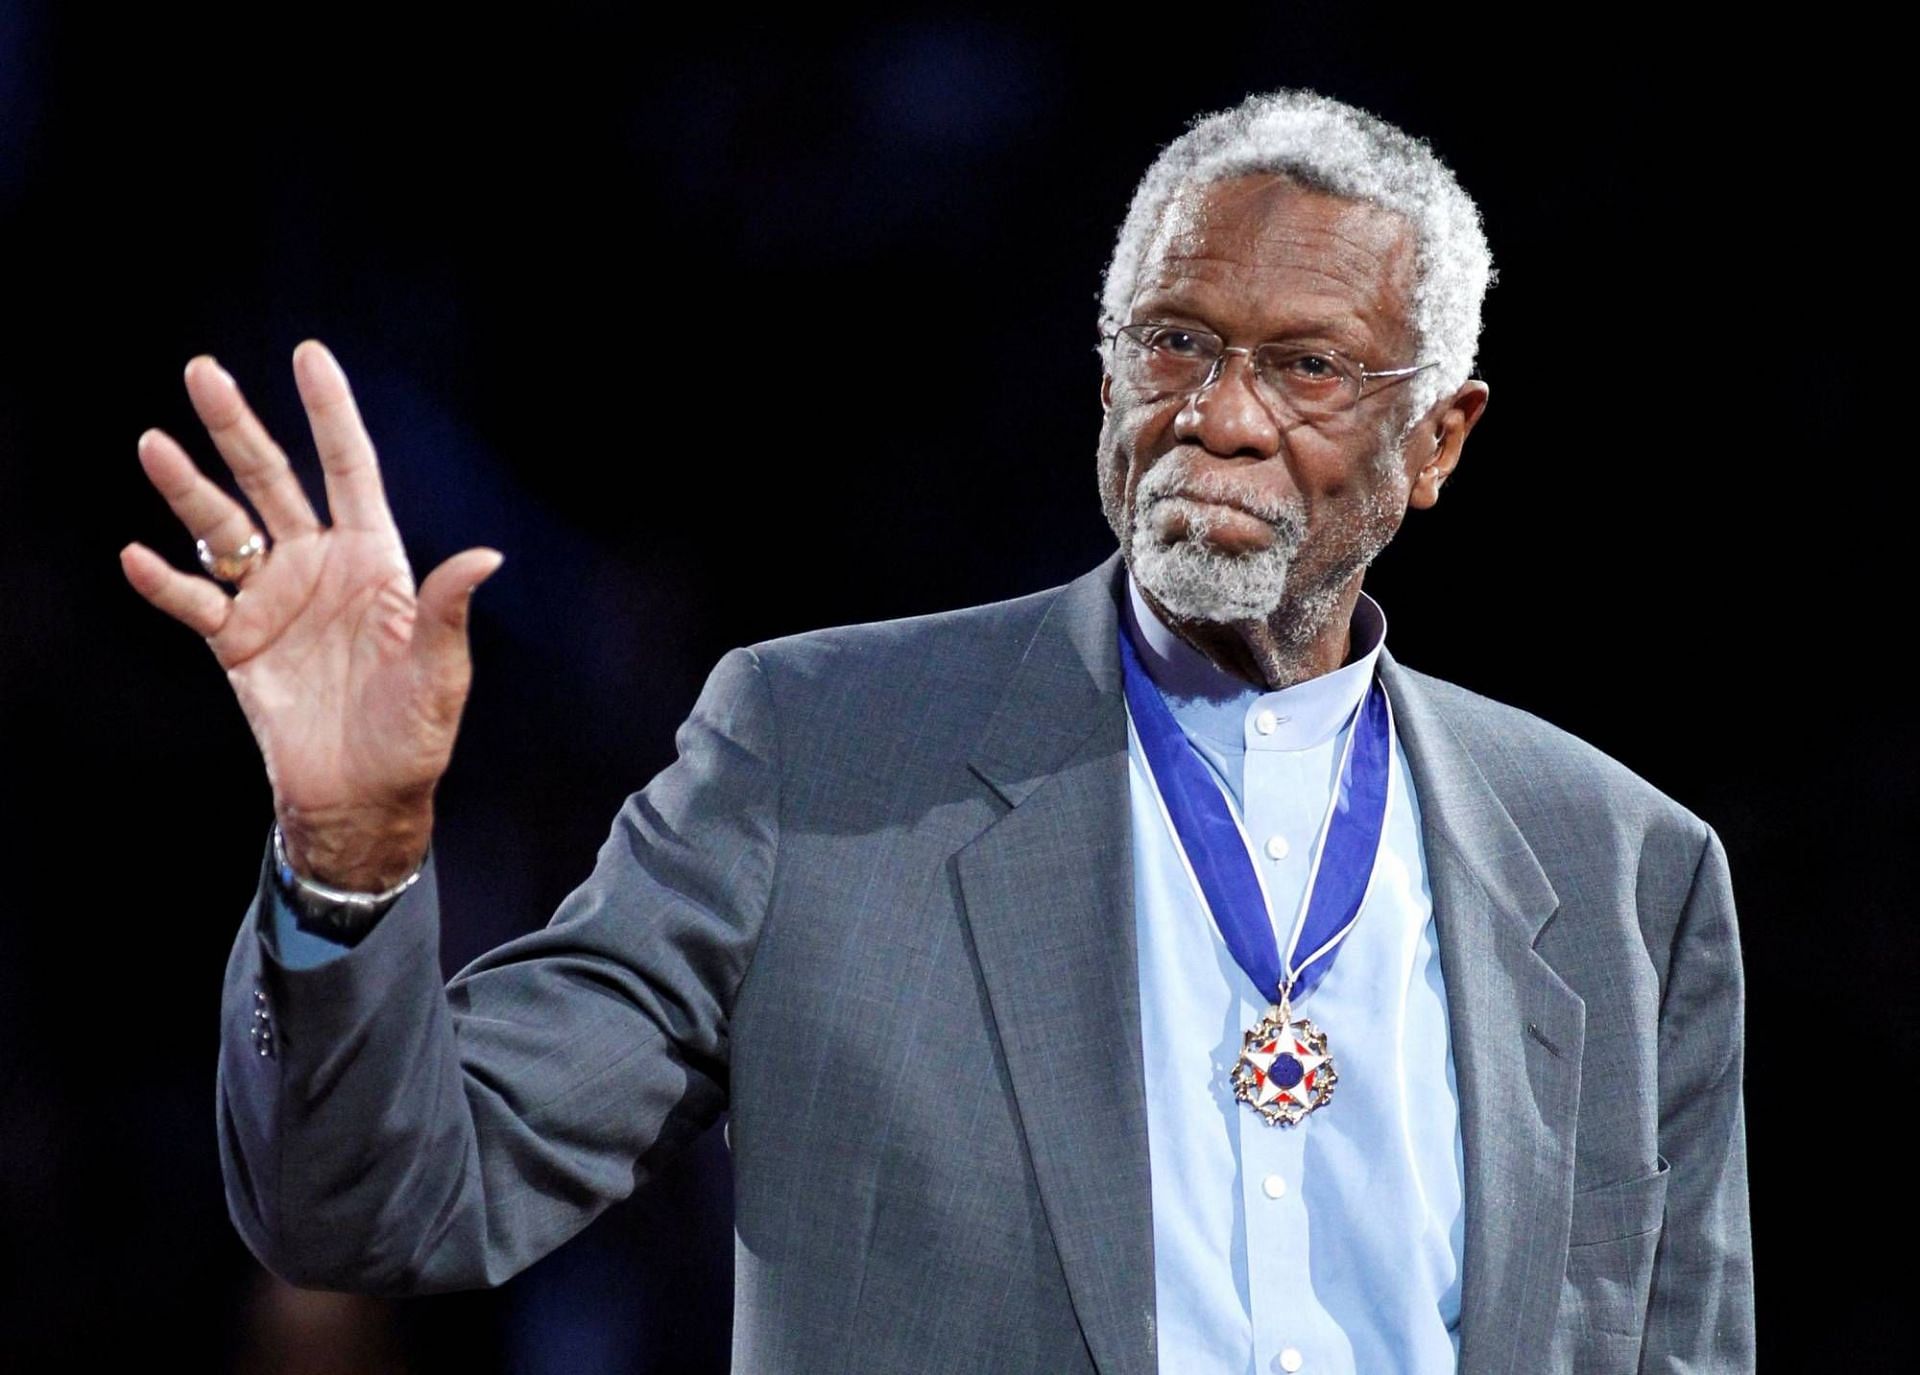 NBA Buzz - FIRST LOOK: Boston Celtics will begin the 2022-23 NBA season in  jerseys honoring Bill Russell. The new “City Edition” uniforms were  designed with Bill's involvement over a year ago